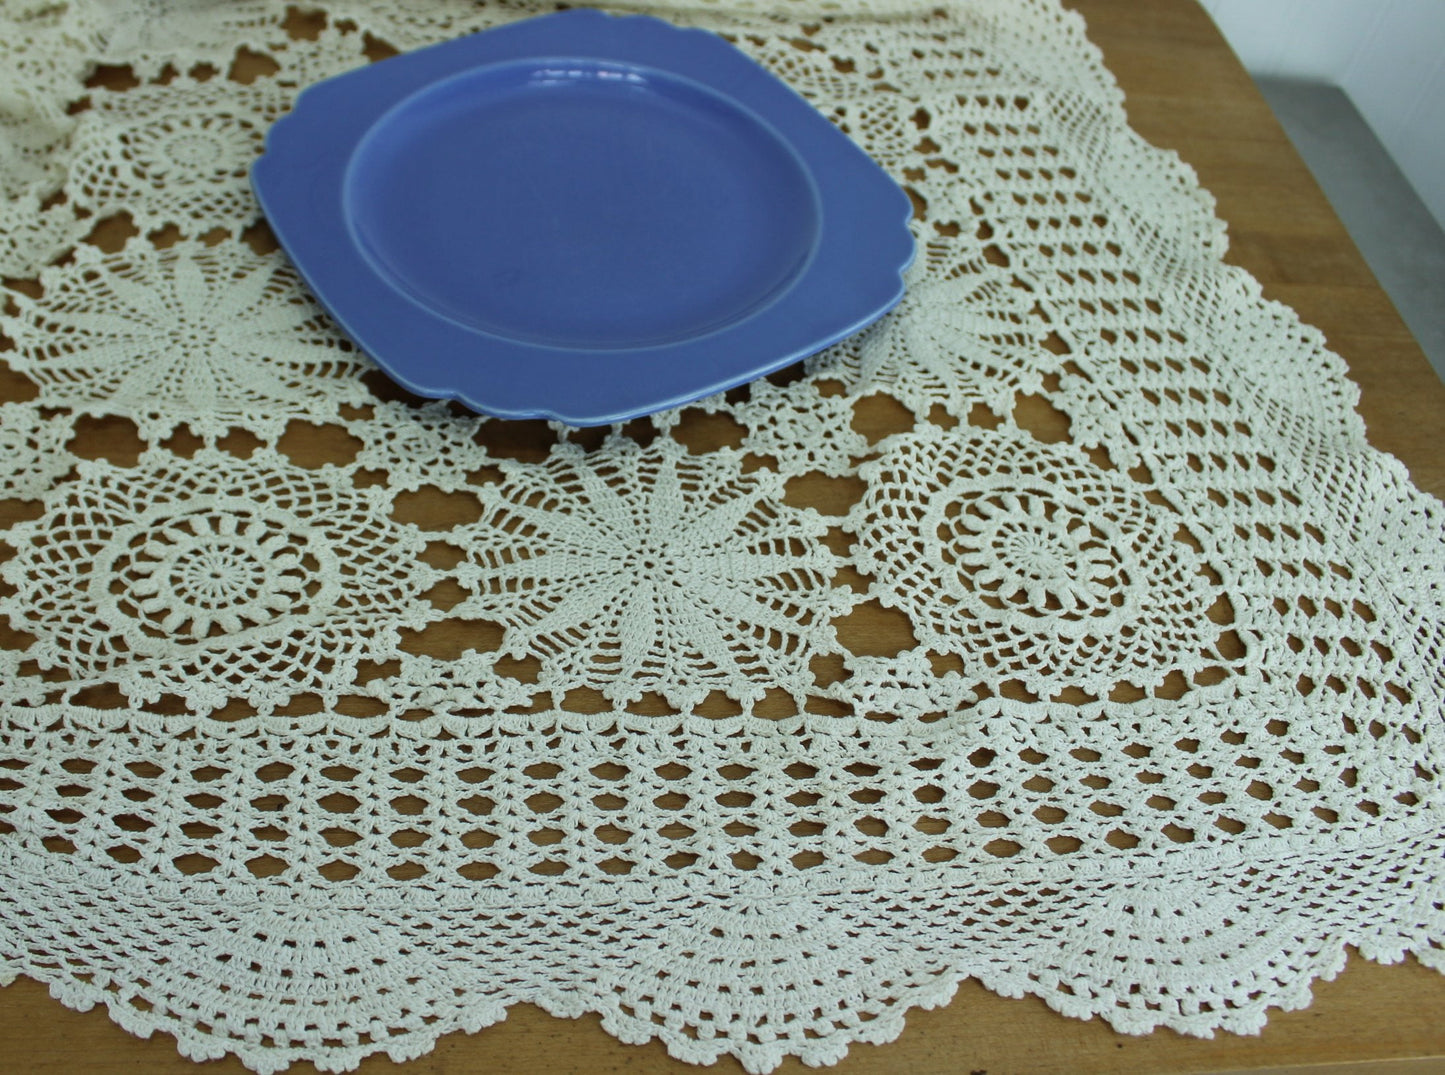 Cotton Lace Bed Coverlet or Tablecloth - Variety Crochet Medallions ~ 85" X 108" holiday table decor